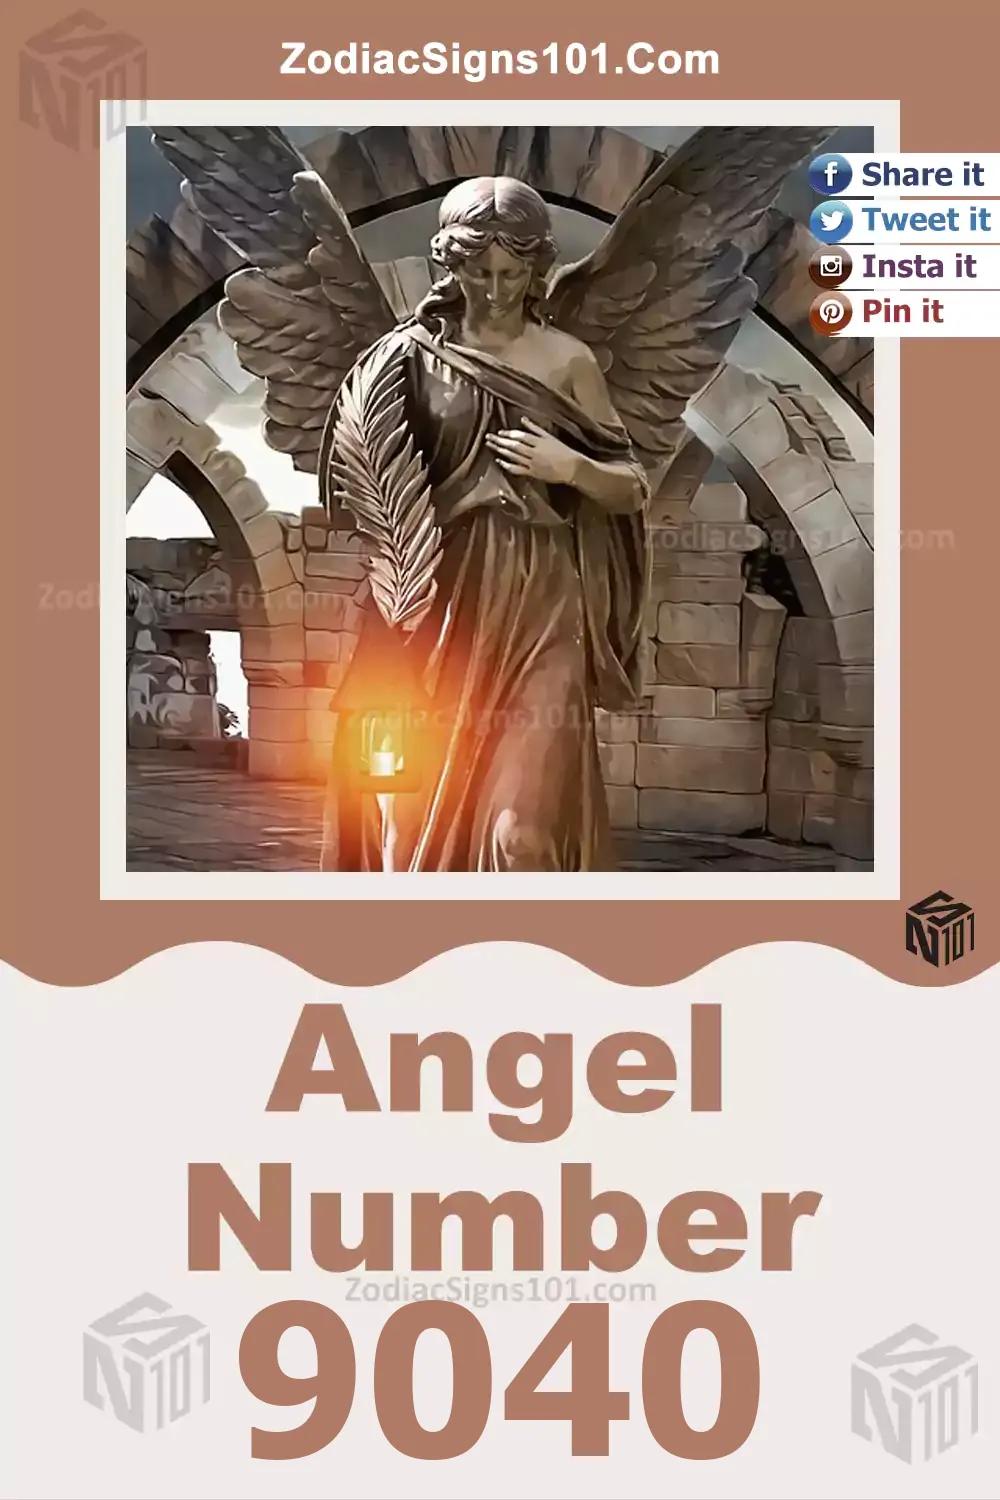 9040 Angel Number Meaning